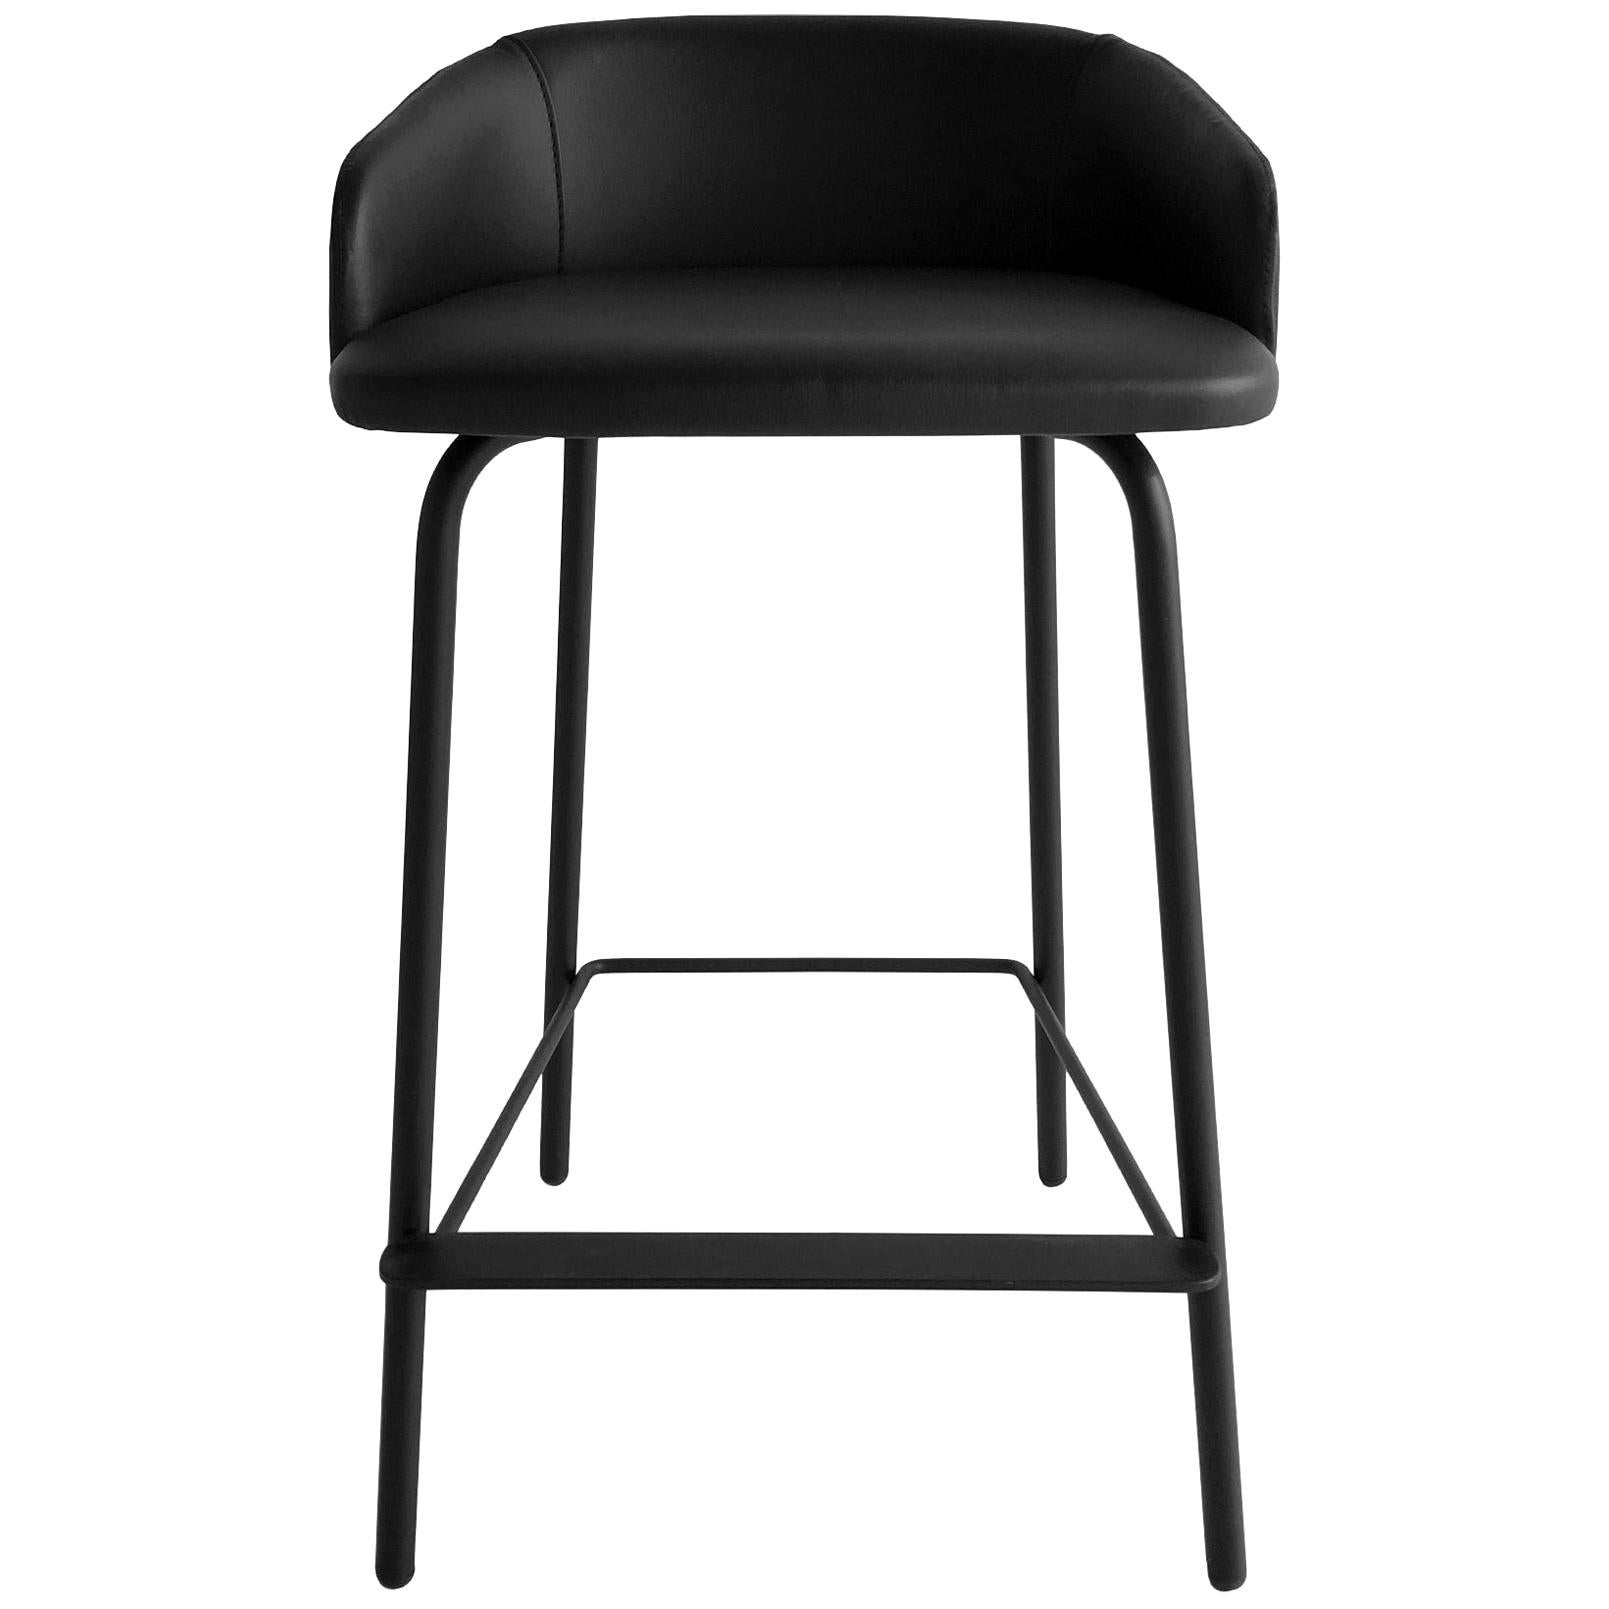 In Stock in Los Angeles, Black Leather Stool by Marco Zito, Made in Italy